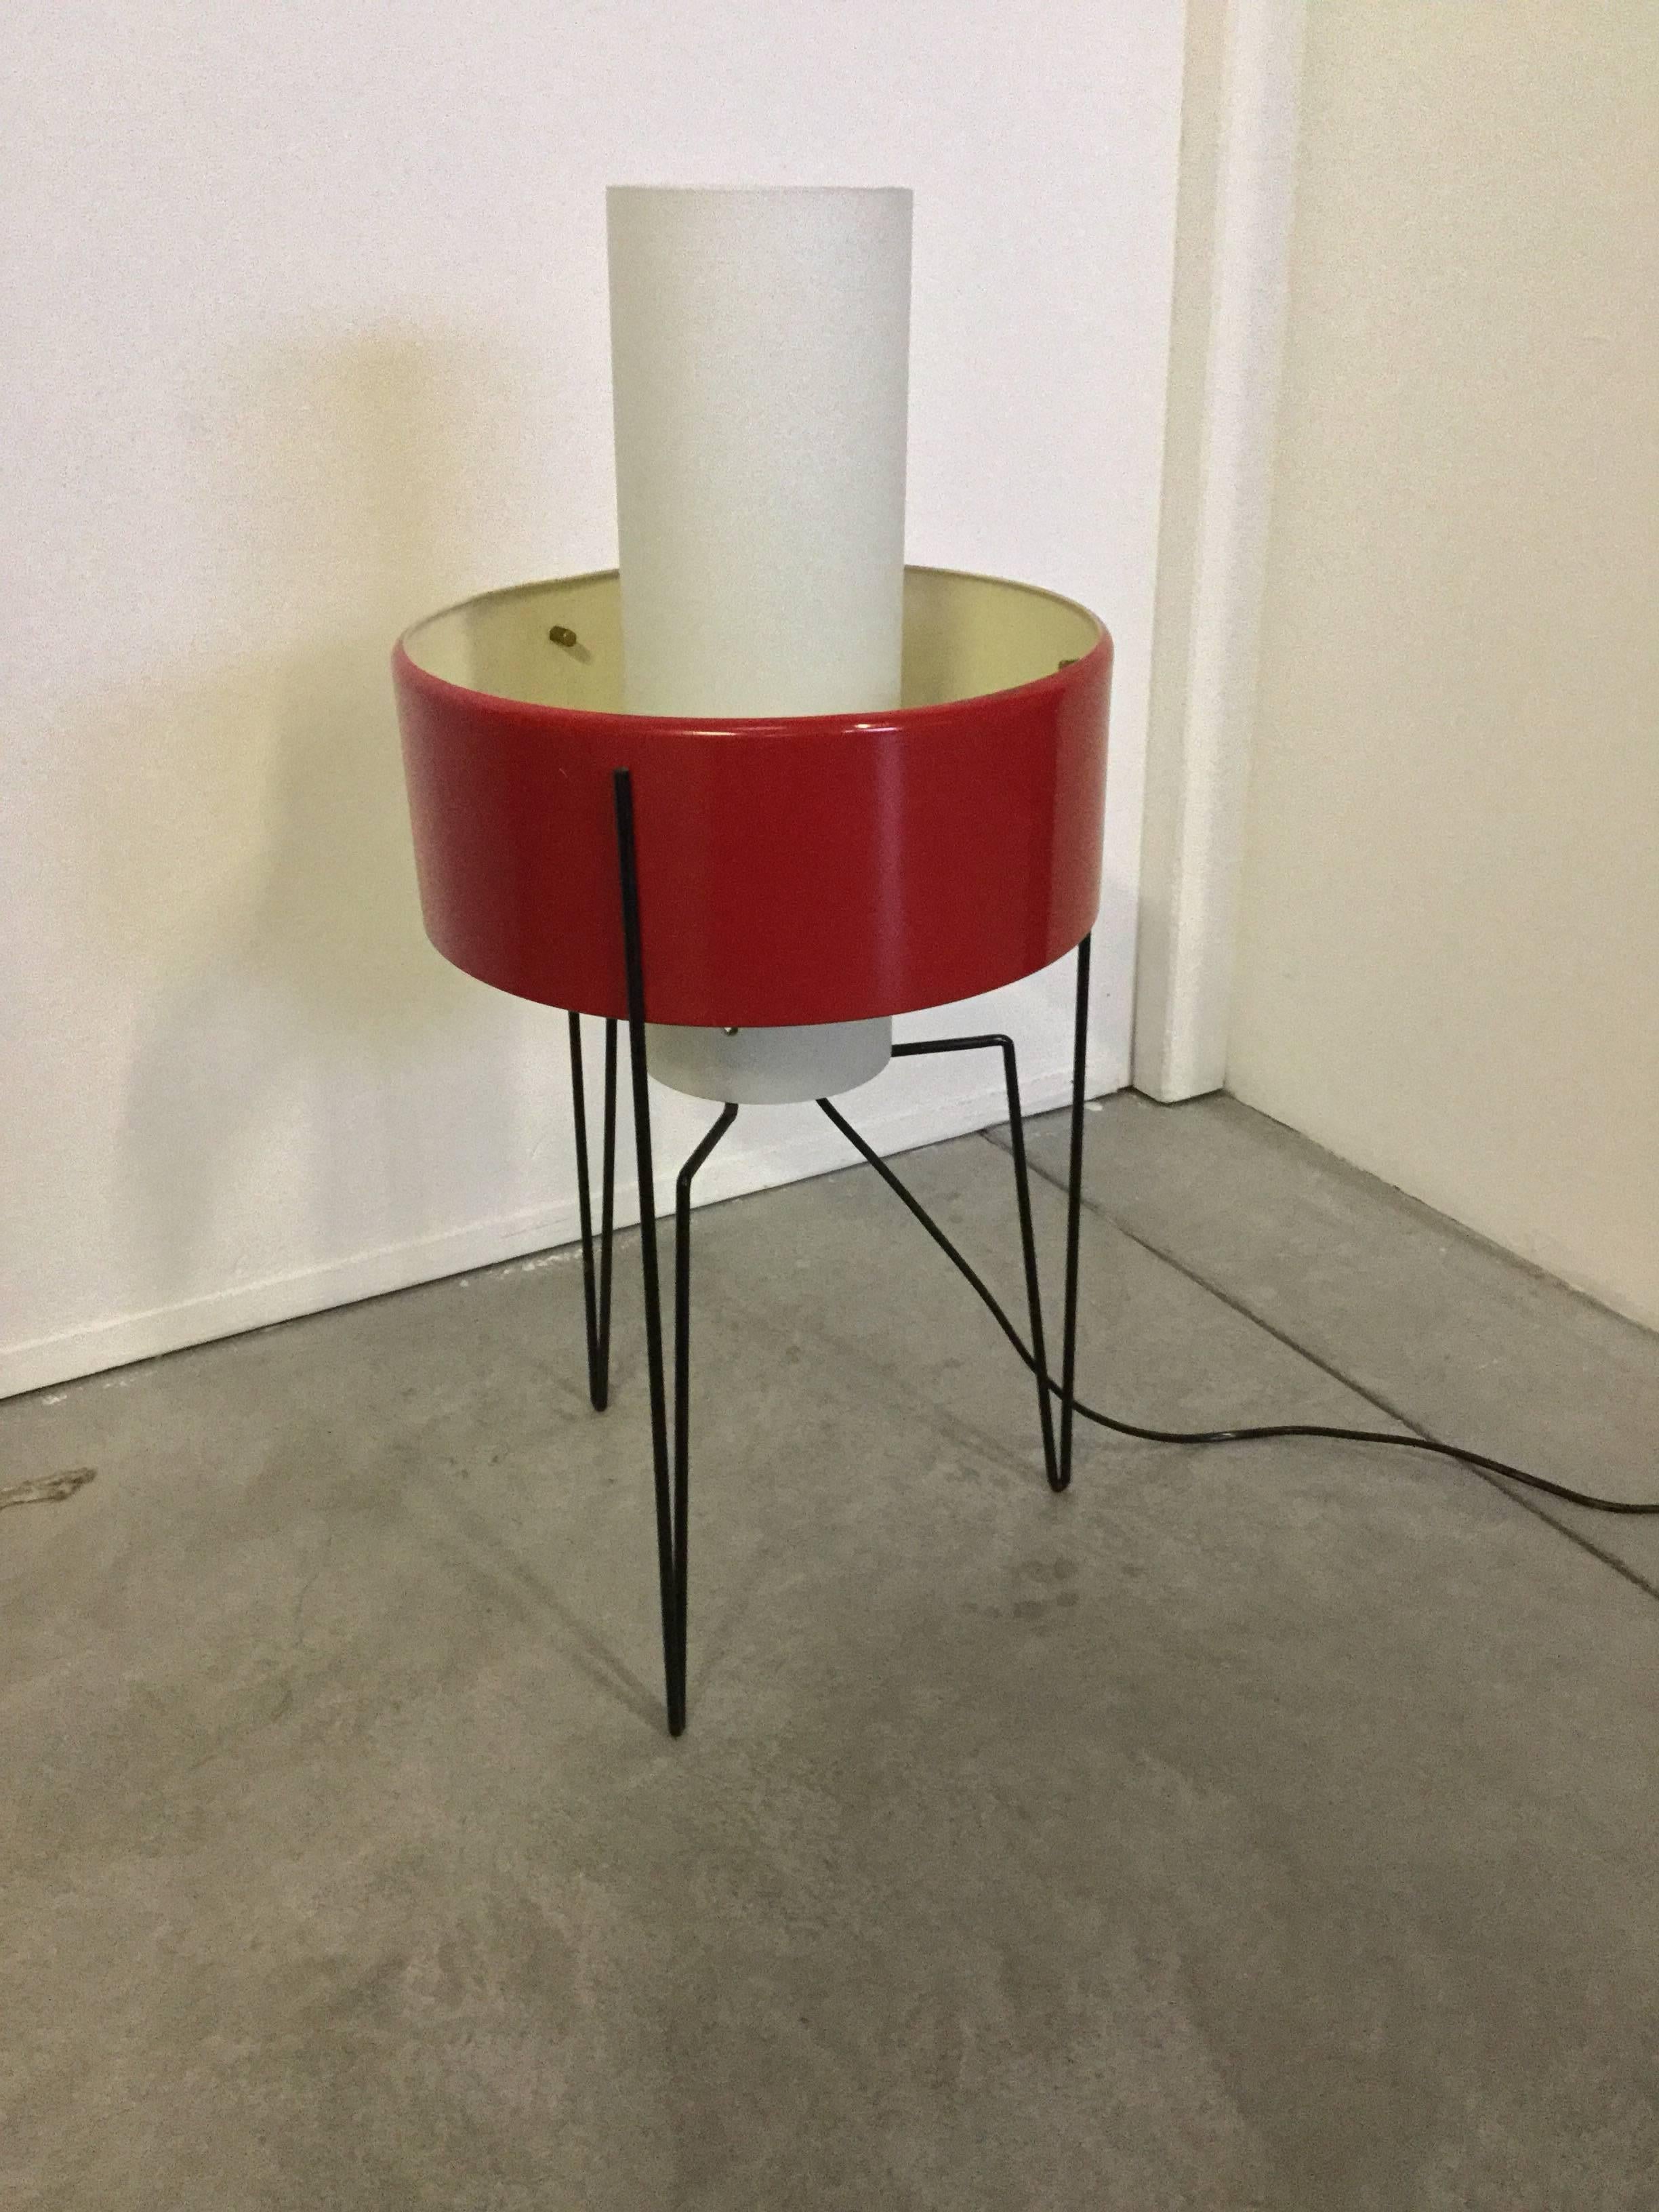 Beautiful table lamp with metal black lacquered frame surmounted by a circular red metal band, inside it a white opaline cylinder glass is positioned as diffuser
Manufactured by Stilnovo in 1950 as the label on the band witness
This model is rare